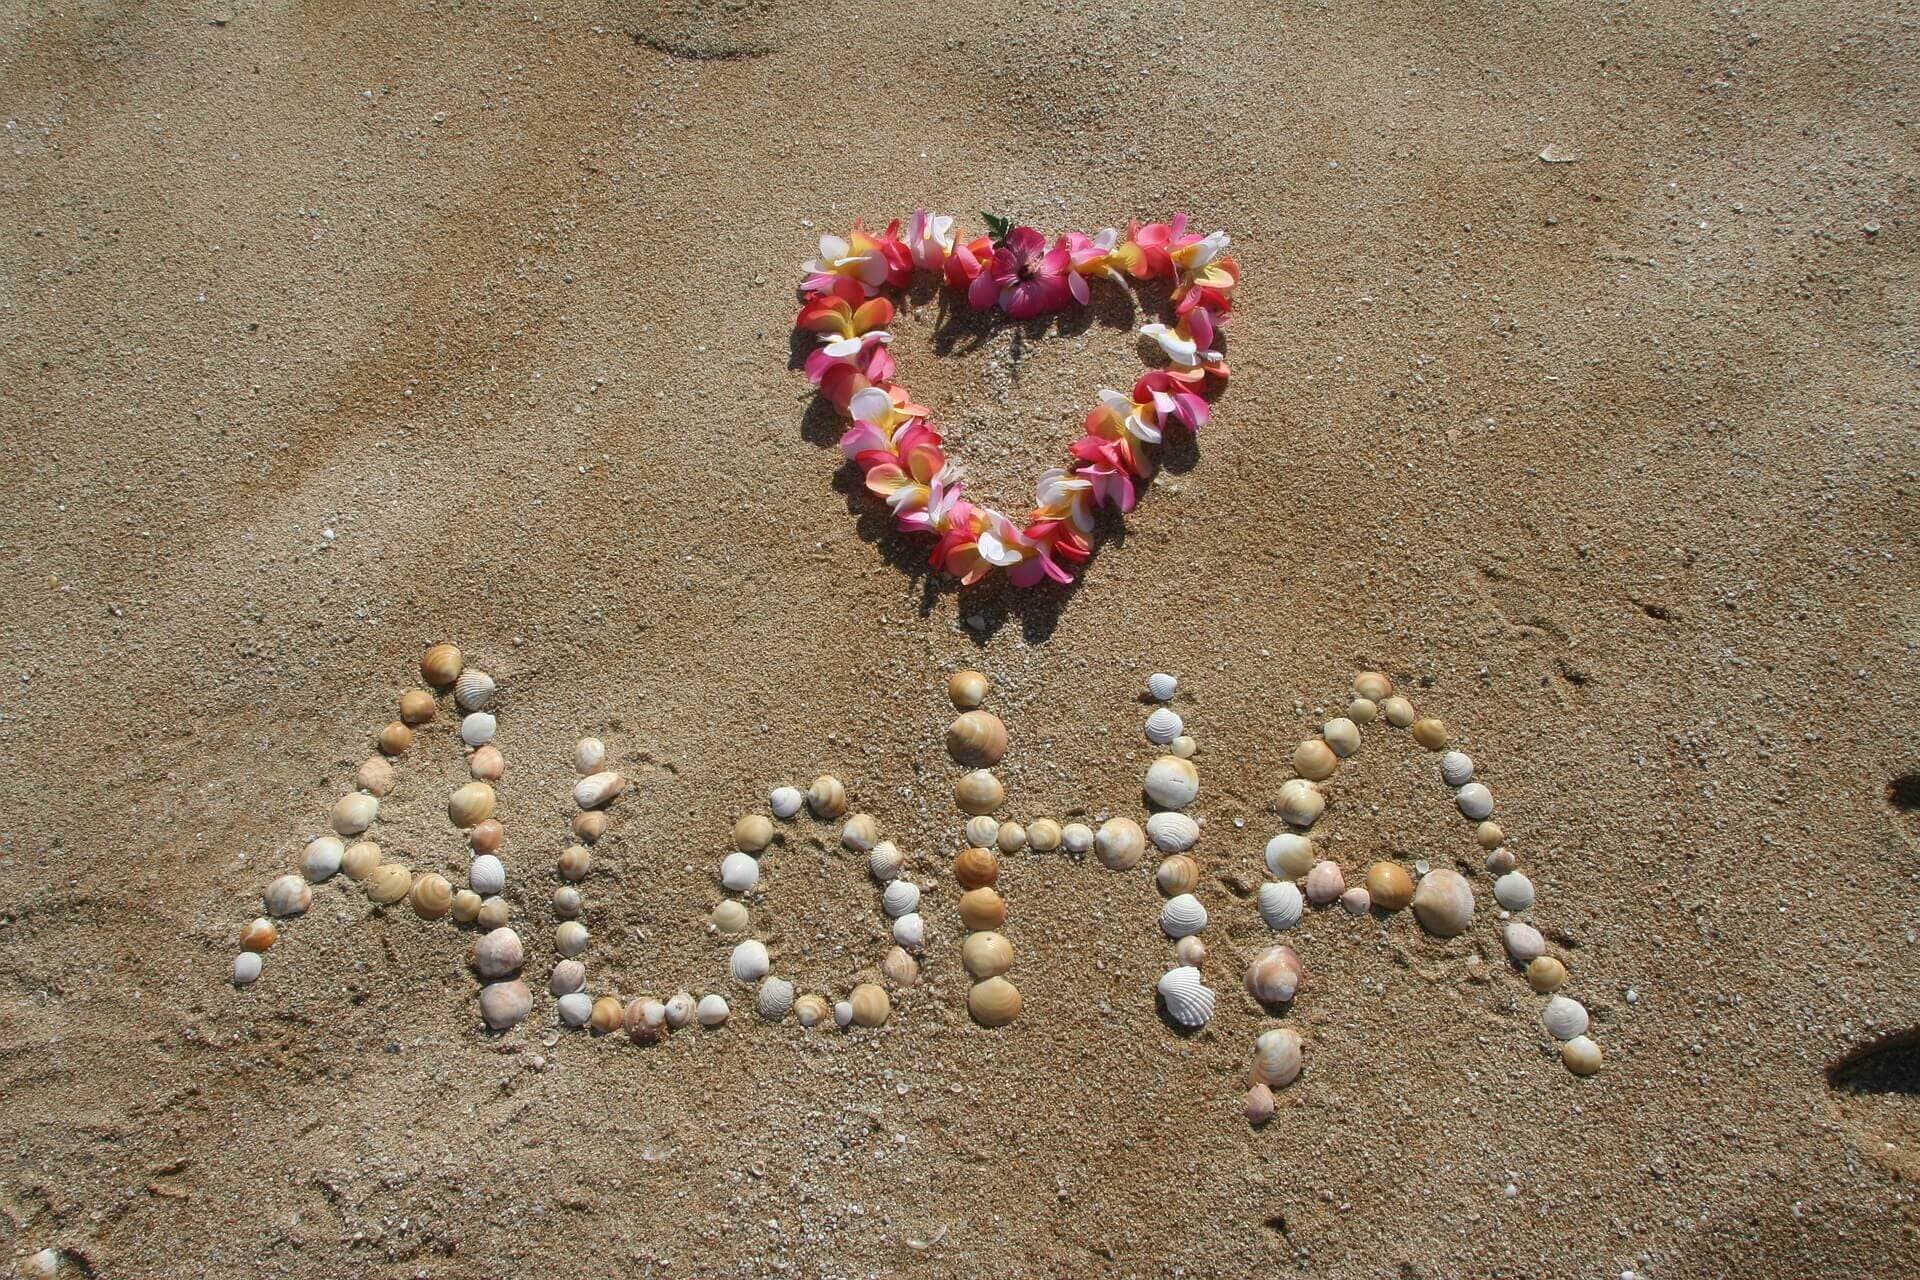 Sand with pebbles spell Aloha to welcome travelers to Hawaiʻi